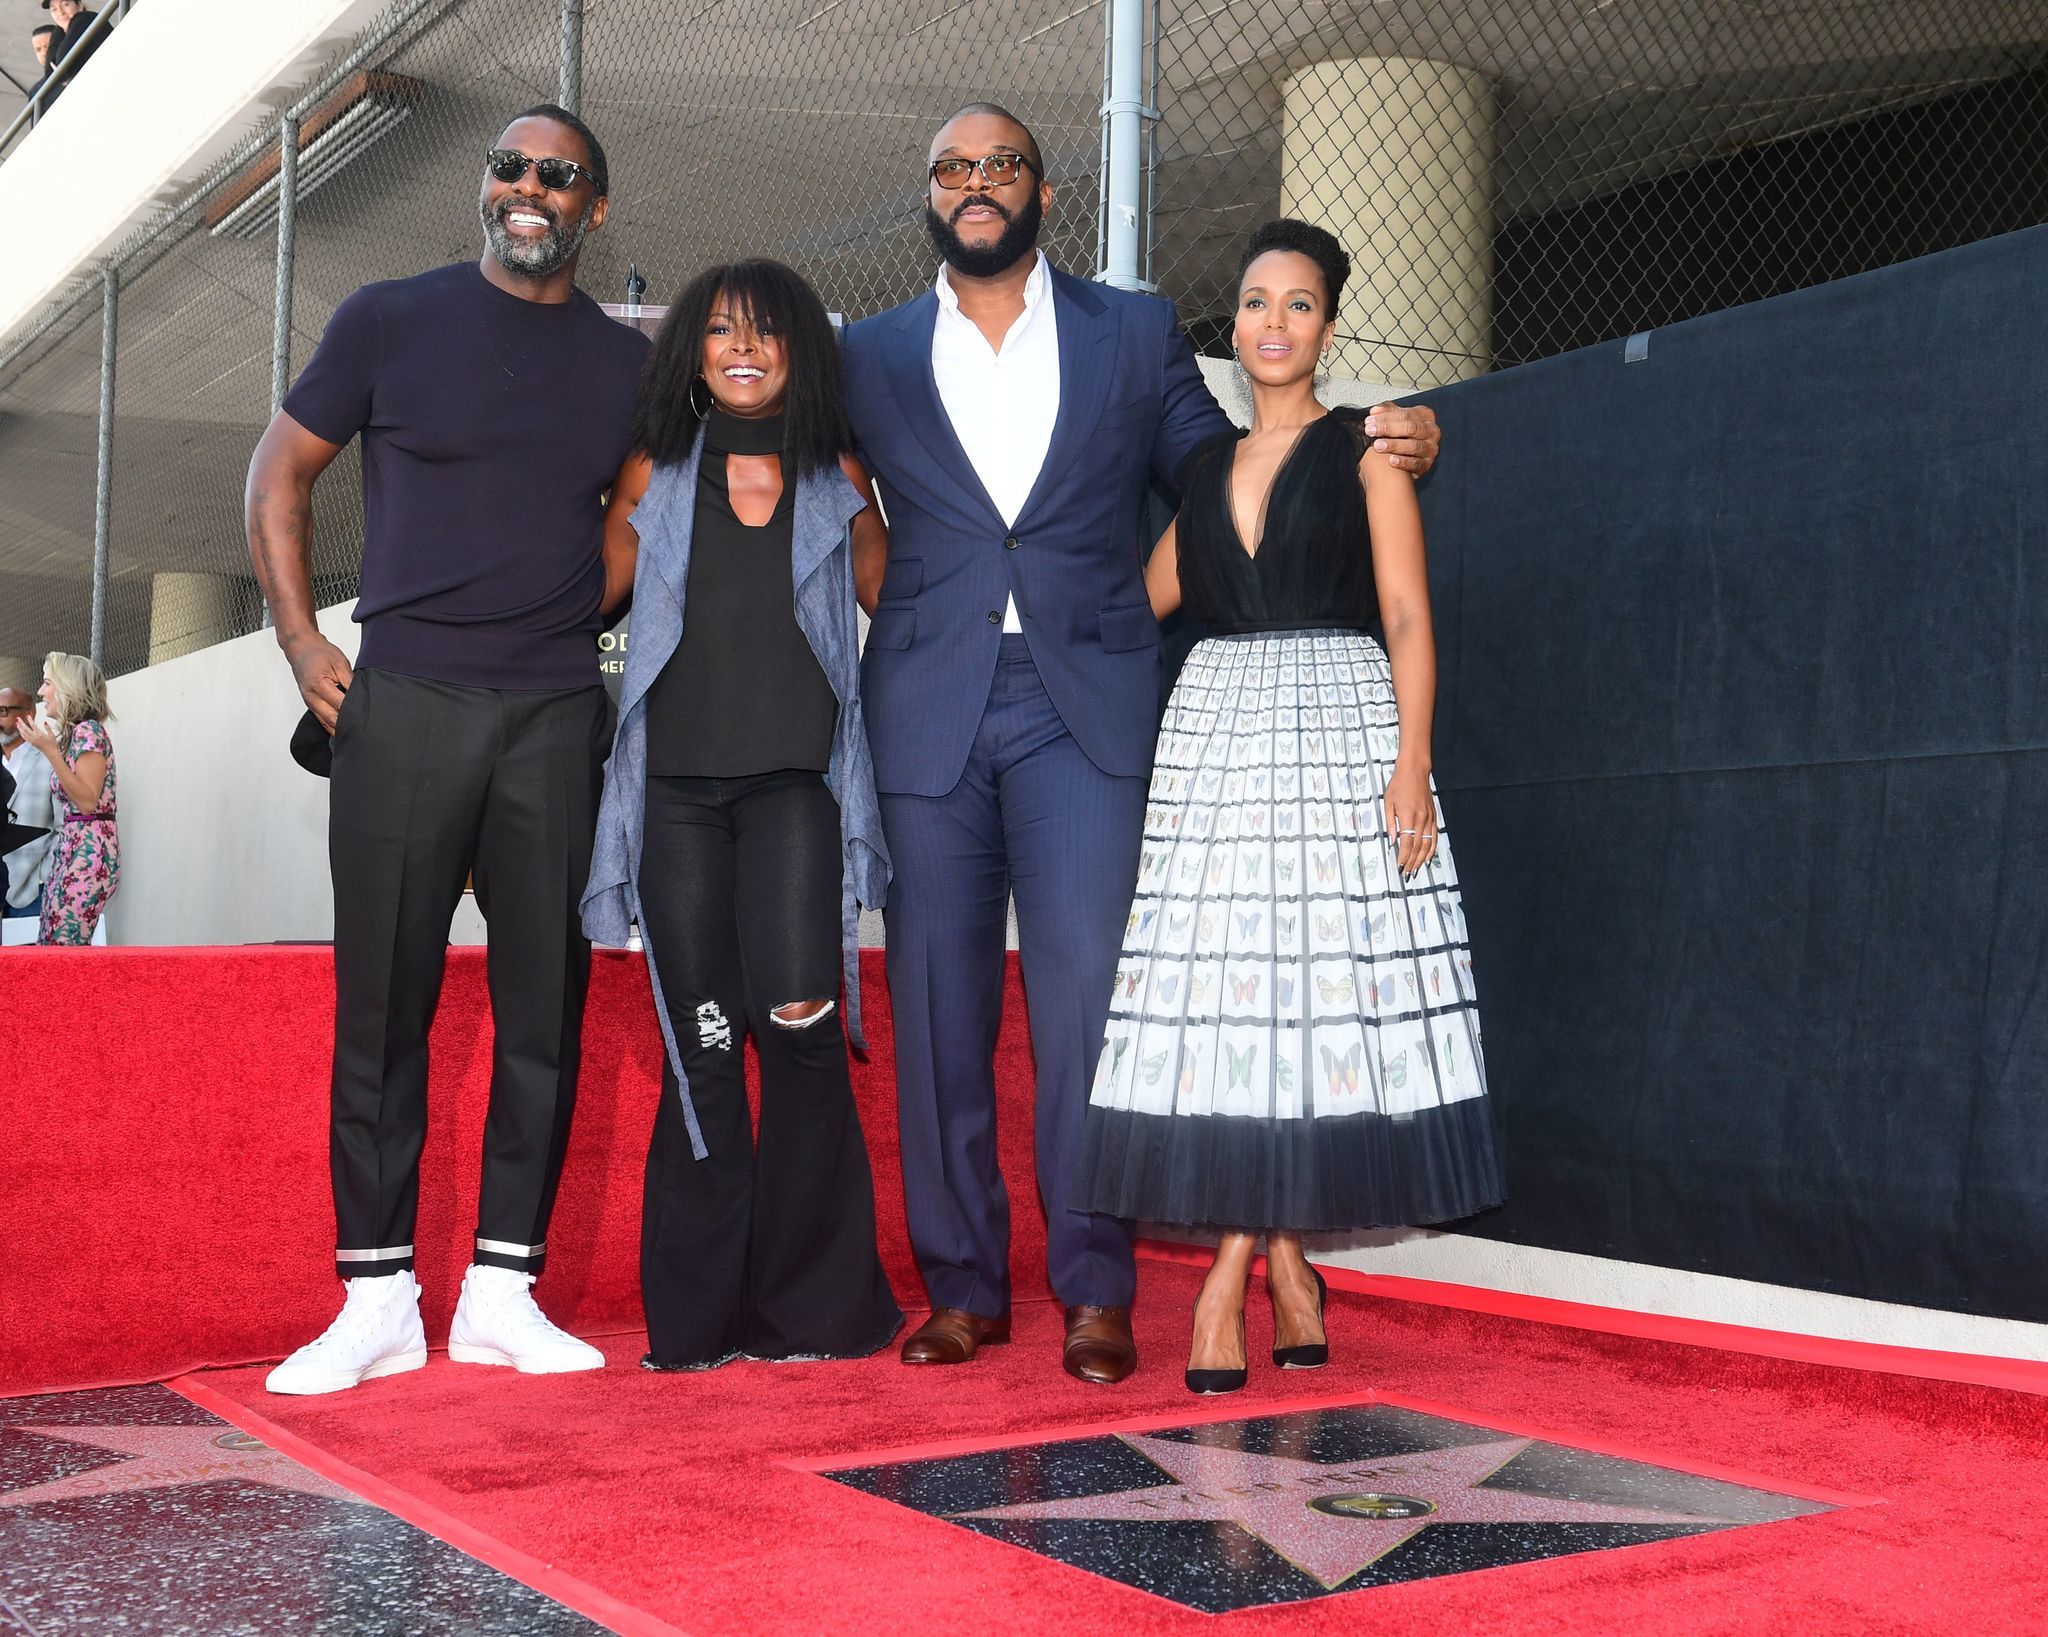 Tyler Perry (2R) was all smiles receiving his star on the Hollywood Walk of Fame on Oct. 1, 2019. The director, actor and producer, who is famous for his stage plays centered around his comedic 